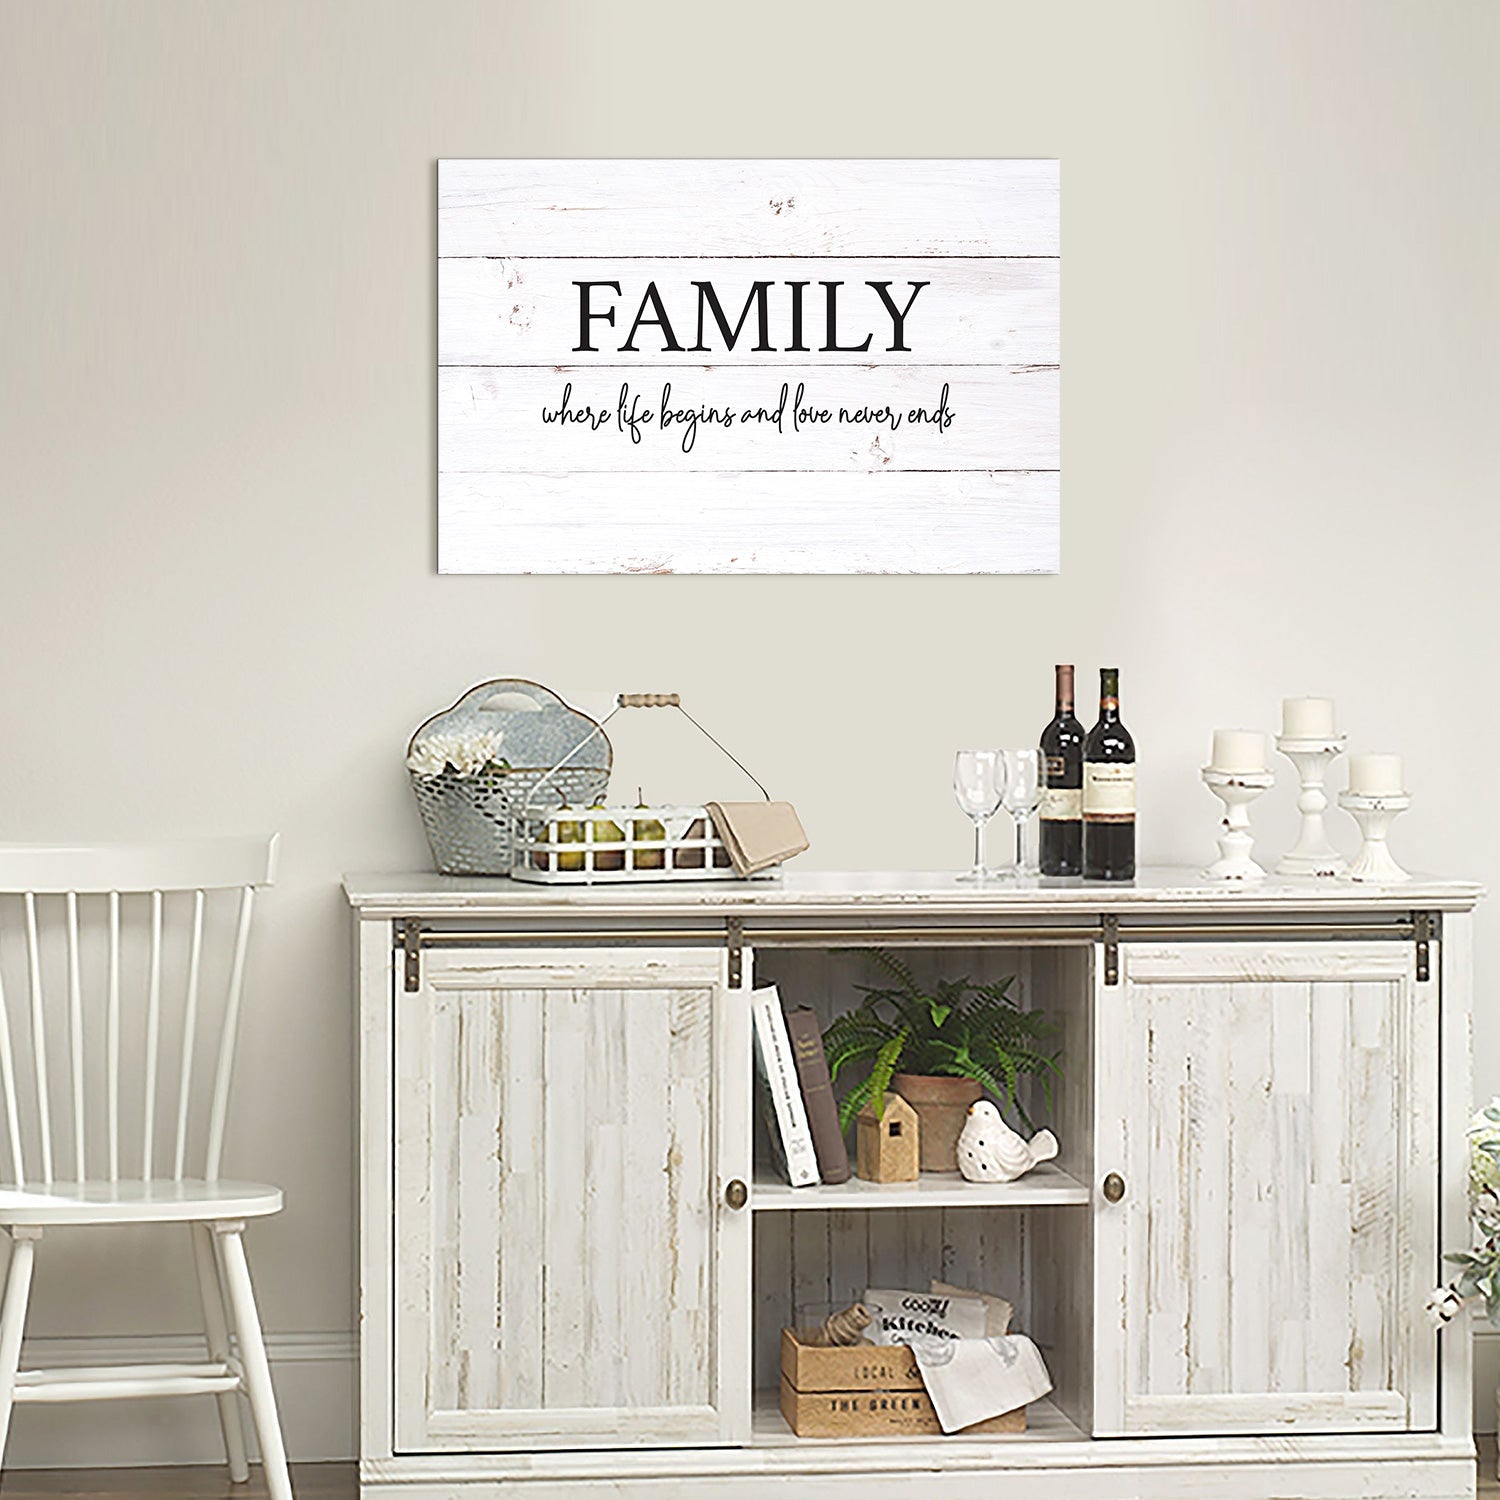 Home and Kitchen - Every Love Story is Beautiful Inspirational Canvas Wall Art Framed Modern Wall Decor Decorative Accents For Walls Ready to Hang for Home Living Room Bedroom Entryway Kitchen Office 24”x16” - LifeSong Milestones